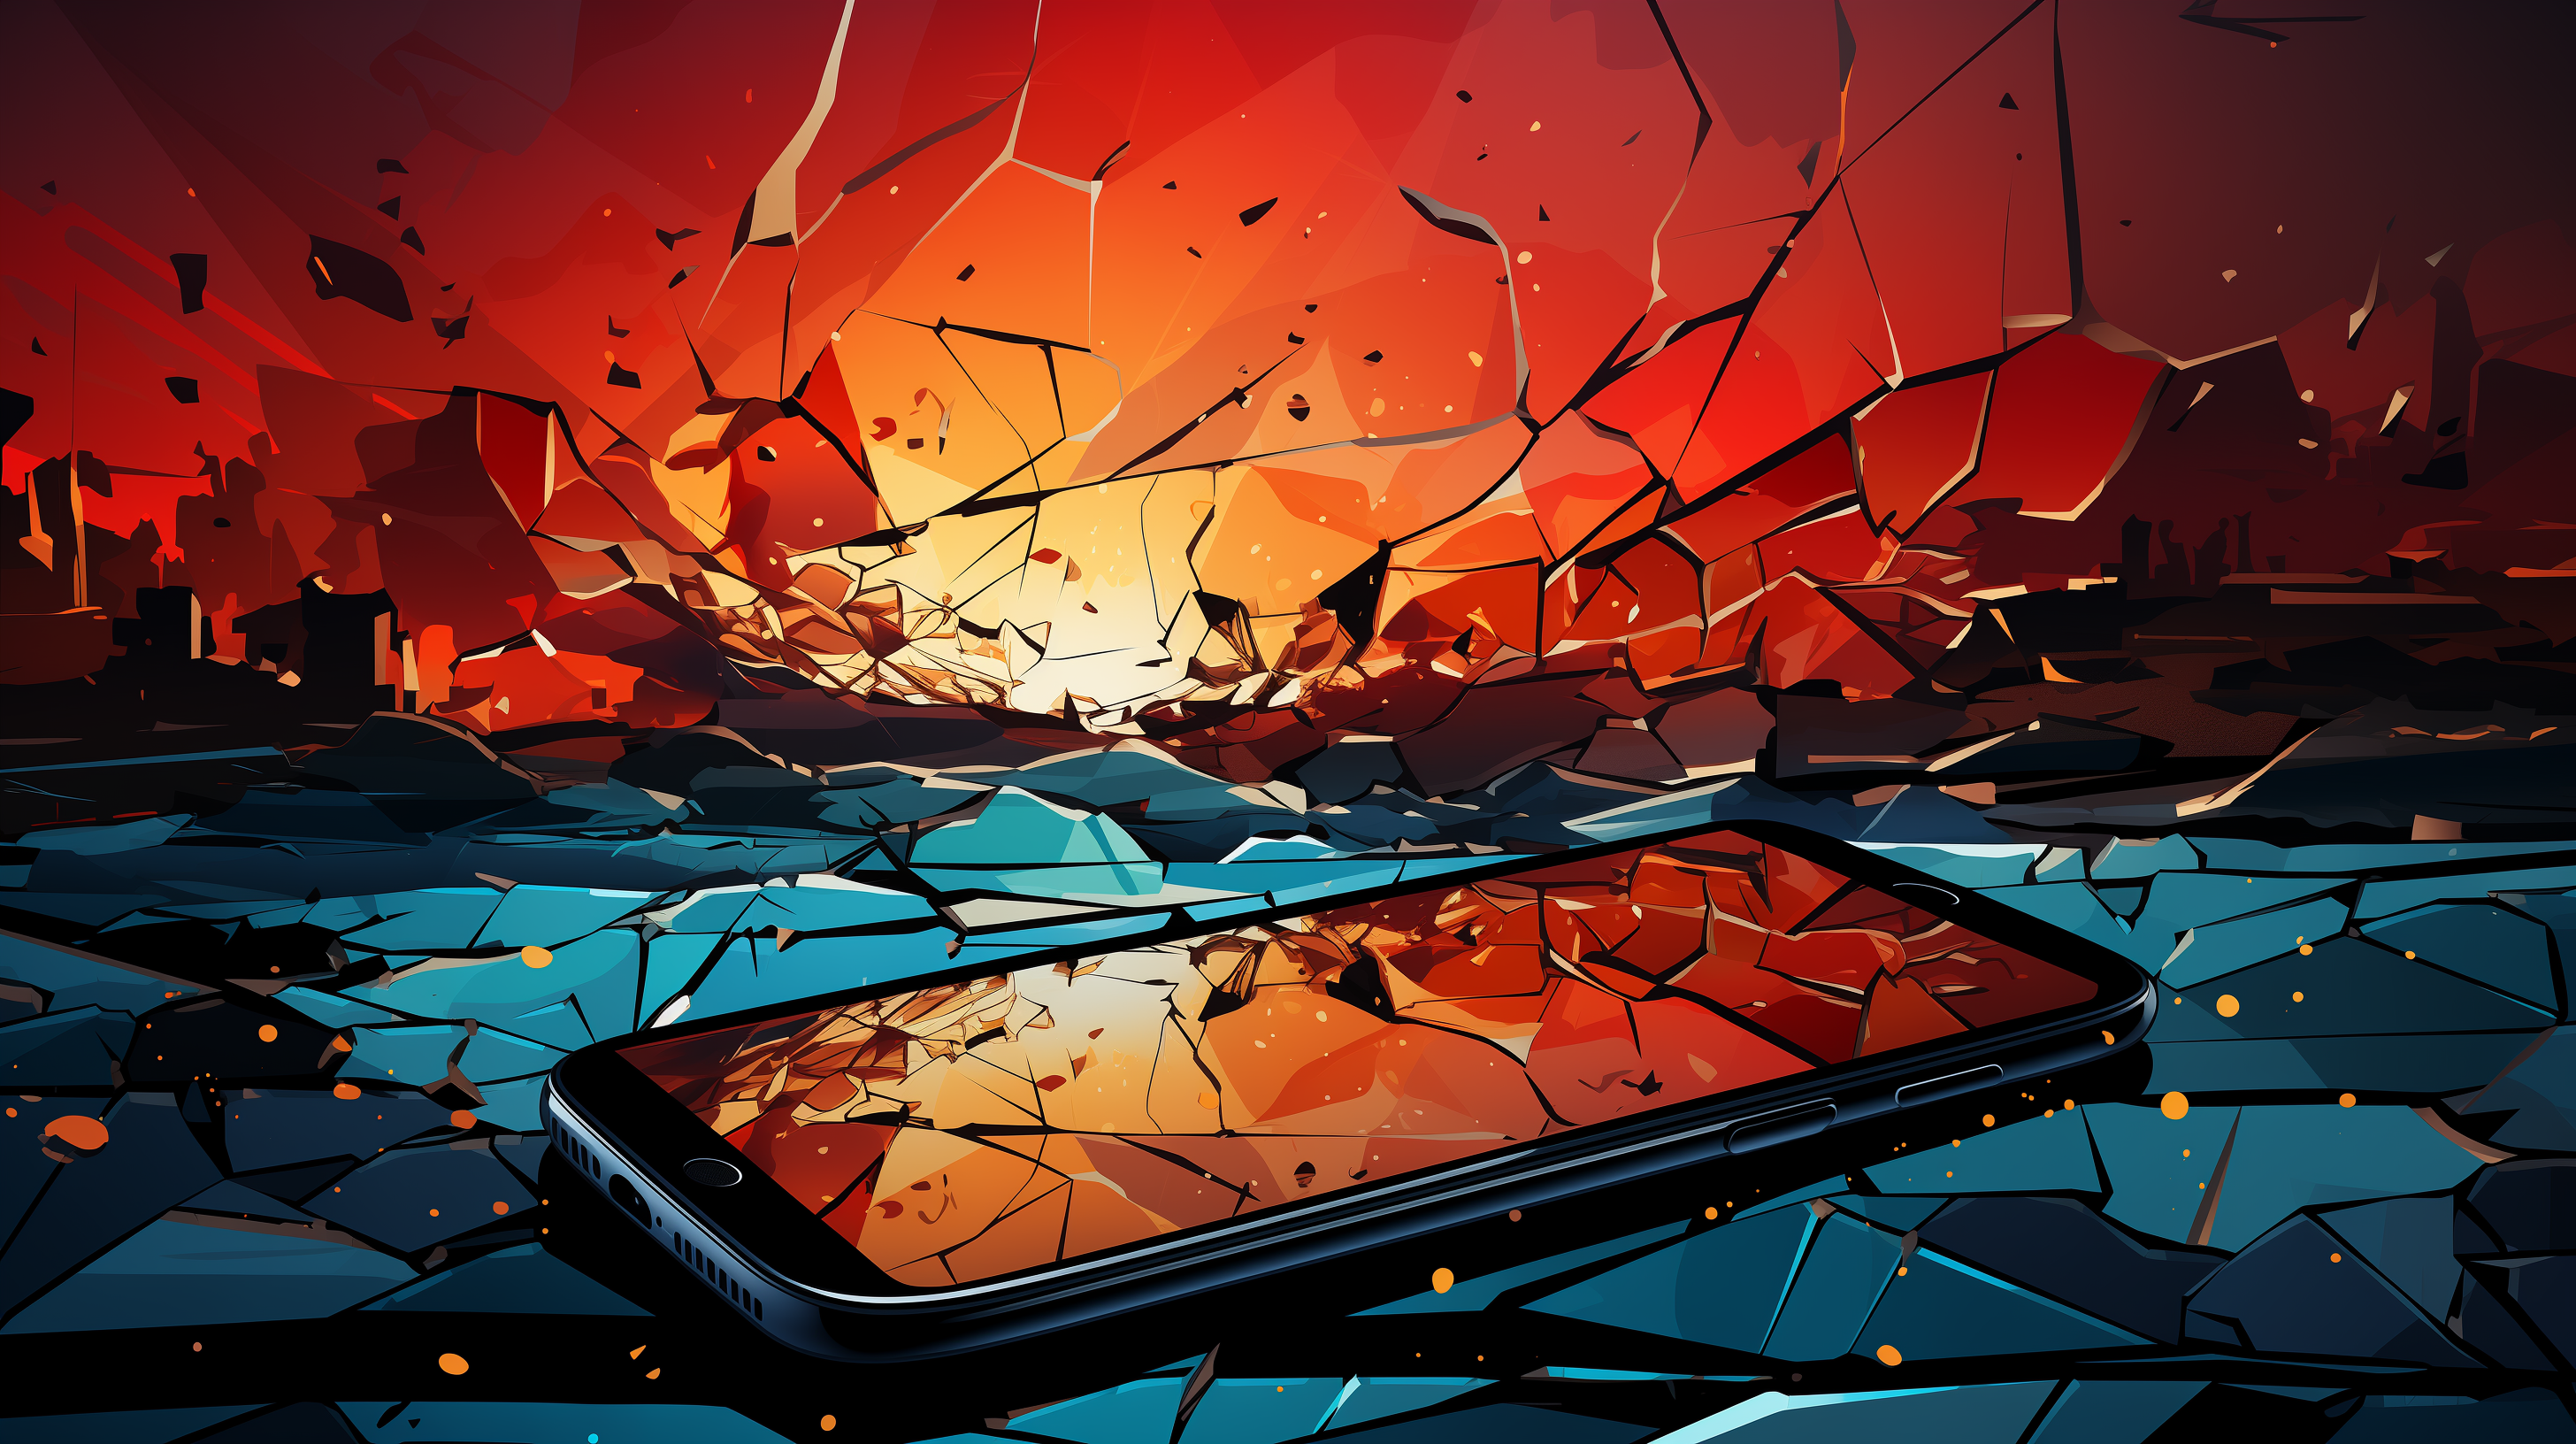 HD desktop wallpaper featuring a smartphone with a cracked screen effect on a vibrant abstract background.